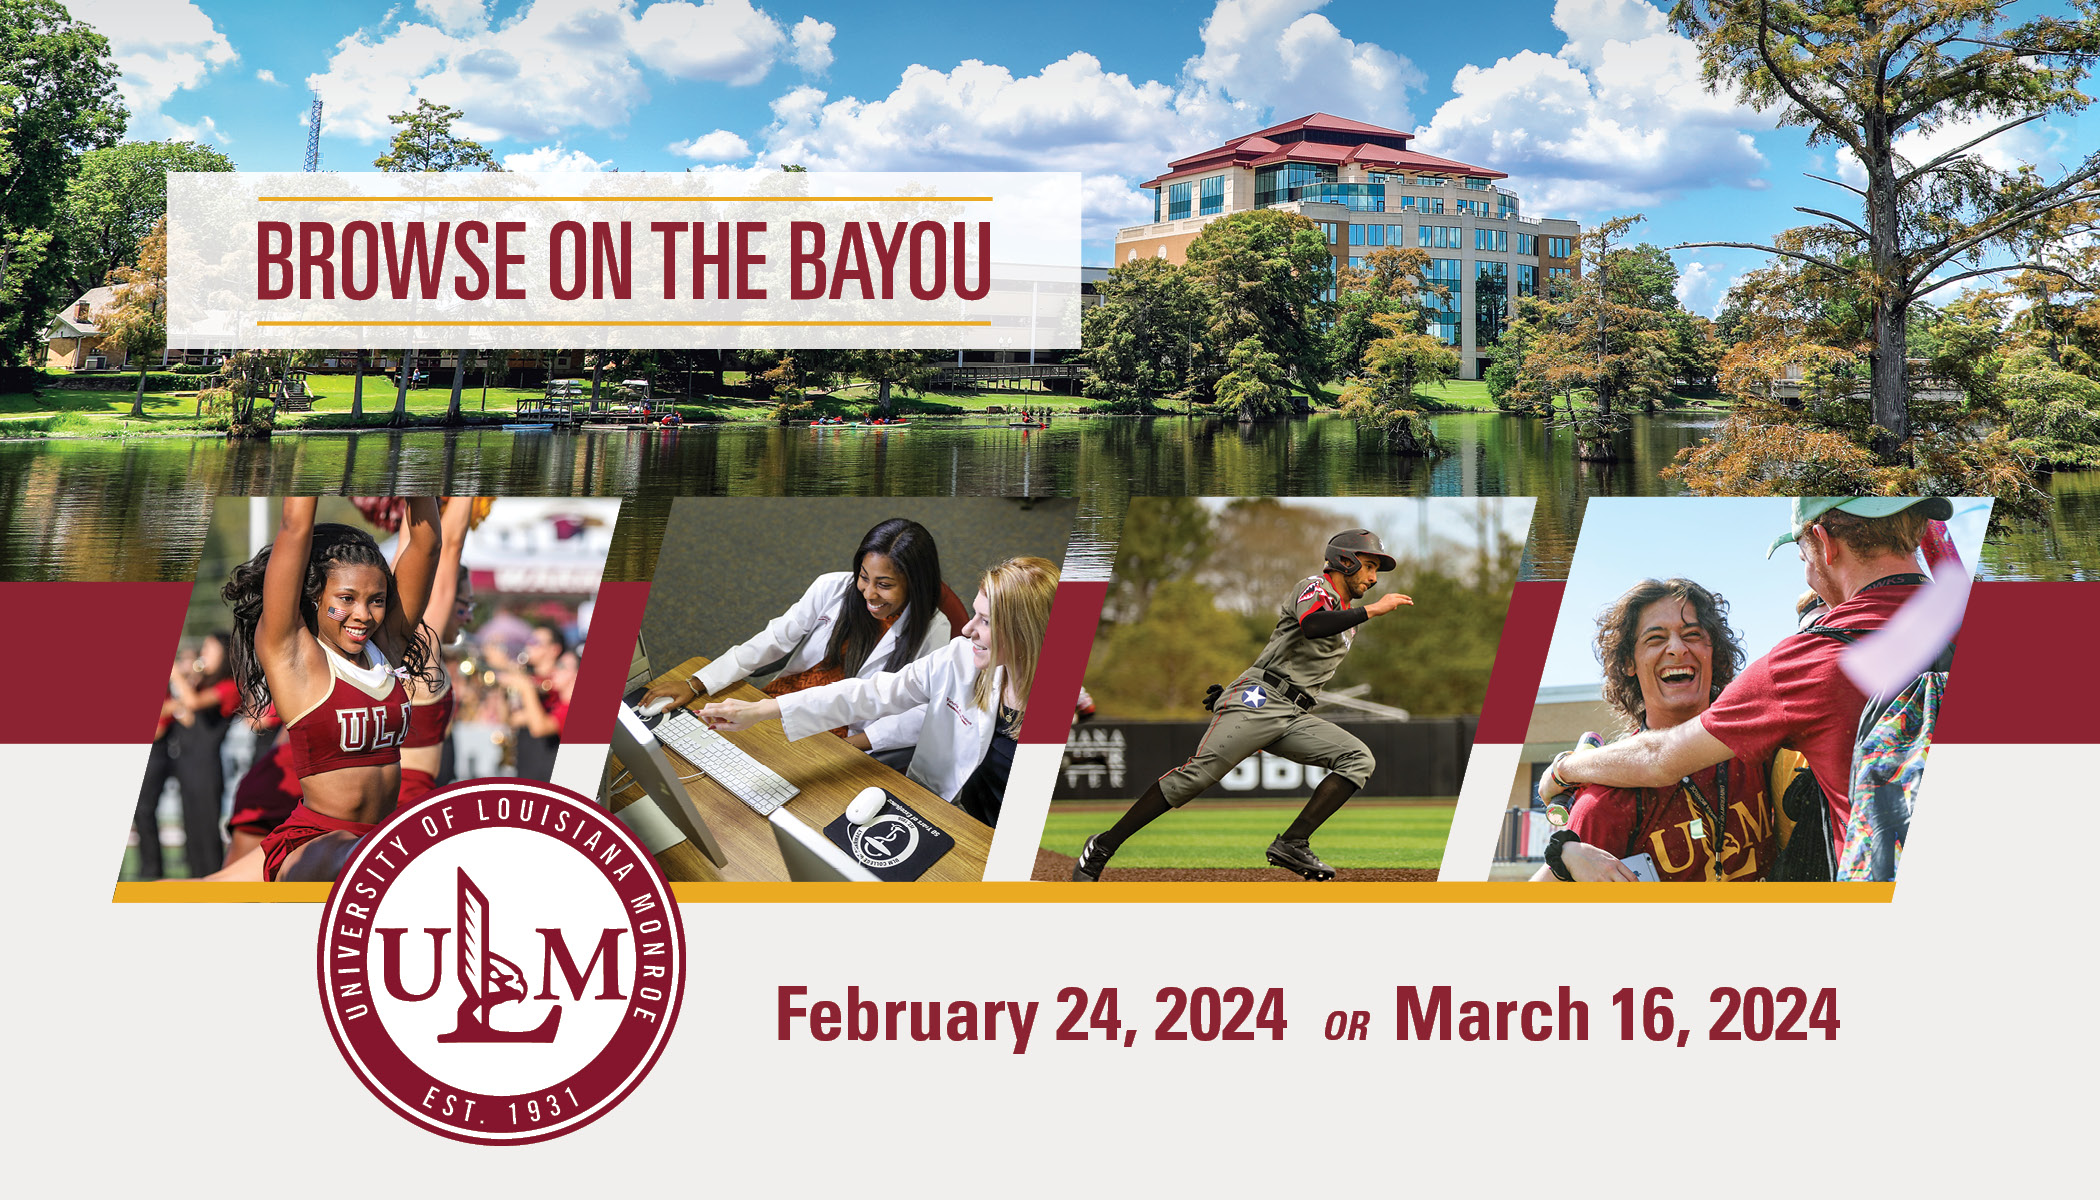 Four photos (a cheerleader, two students pointing at a computer, a baseball player, and two students smiling and embracing) layover an image of a tall building overlooking a bayou. People are kayaking on the bayou. ɫAV's logo is in the corner. Text reads, "February 24, 2024 or March 16, 2024"